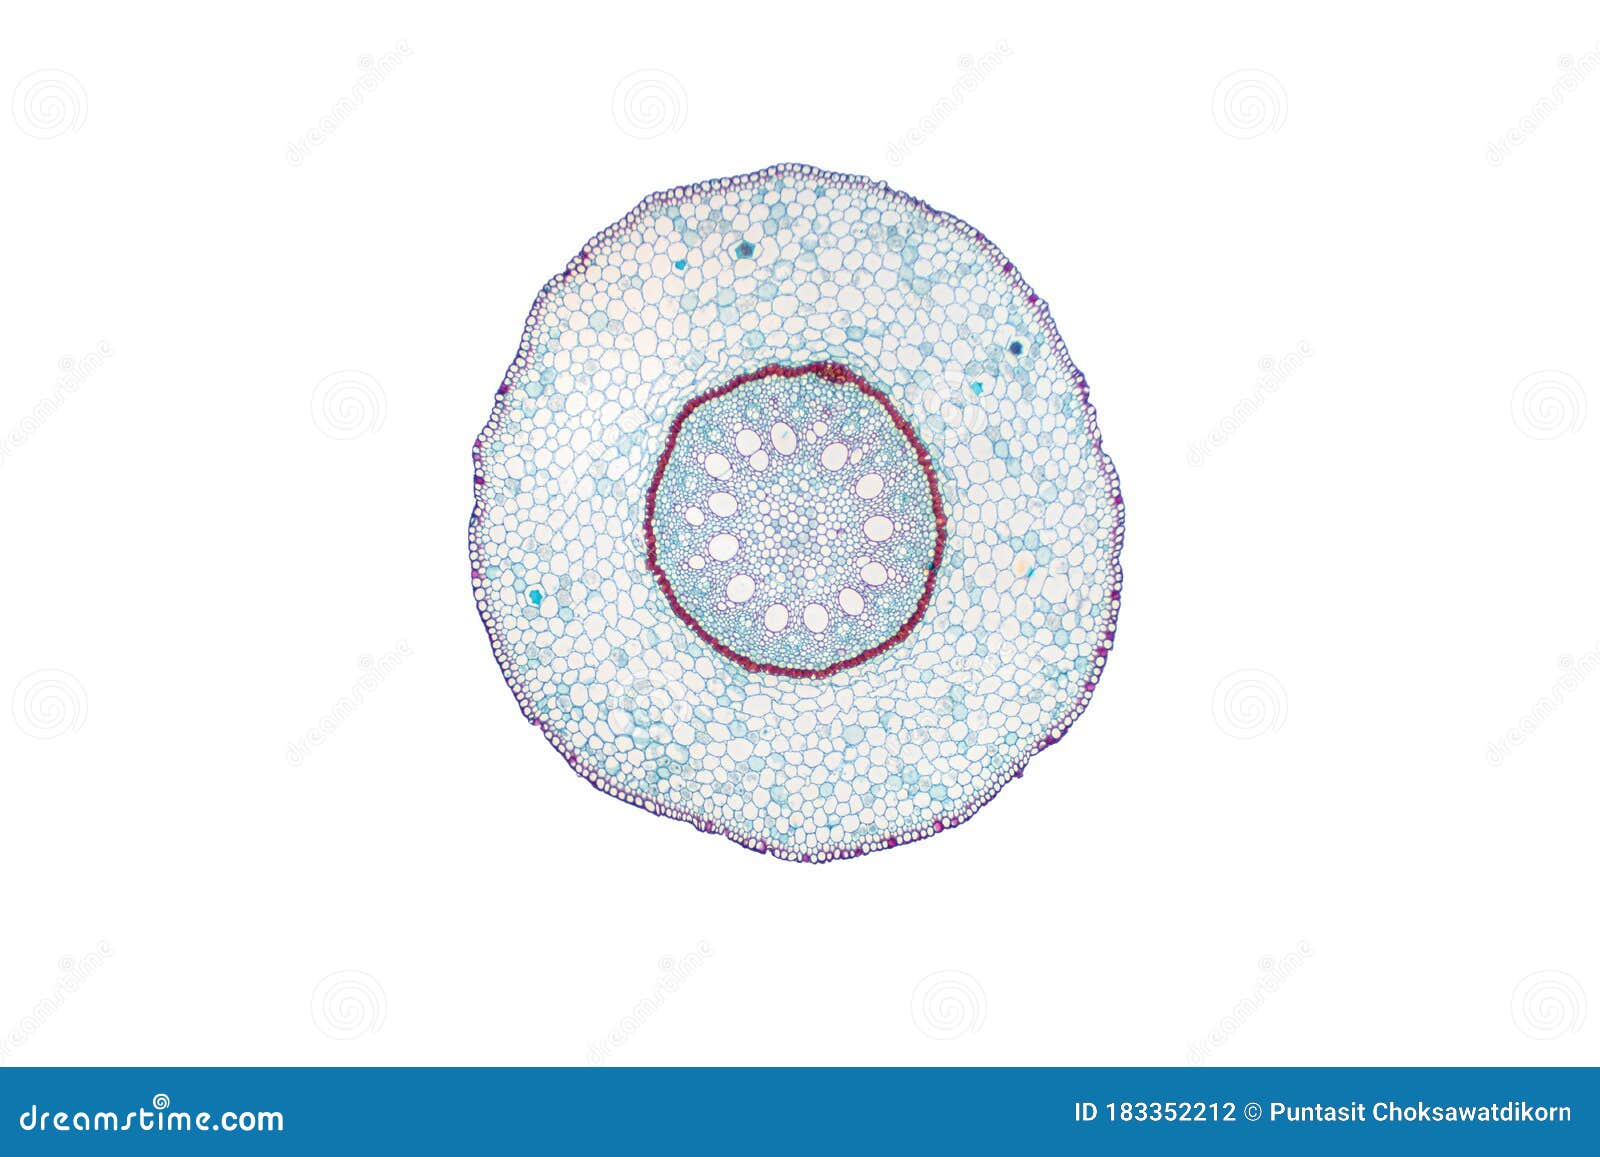 monocot root cross section slide view under microscope for botany education